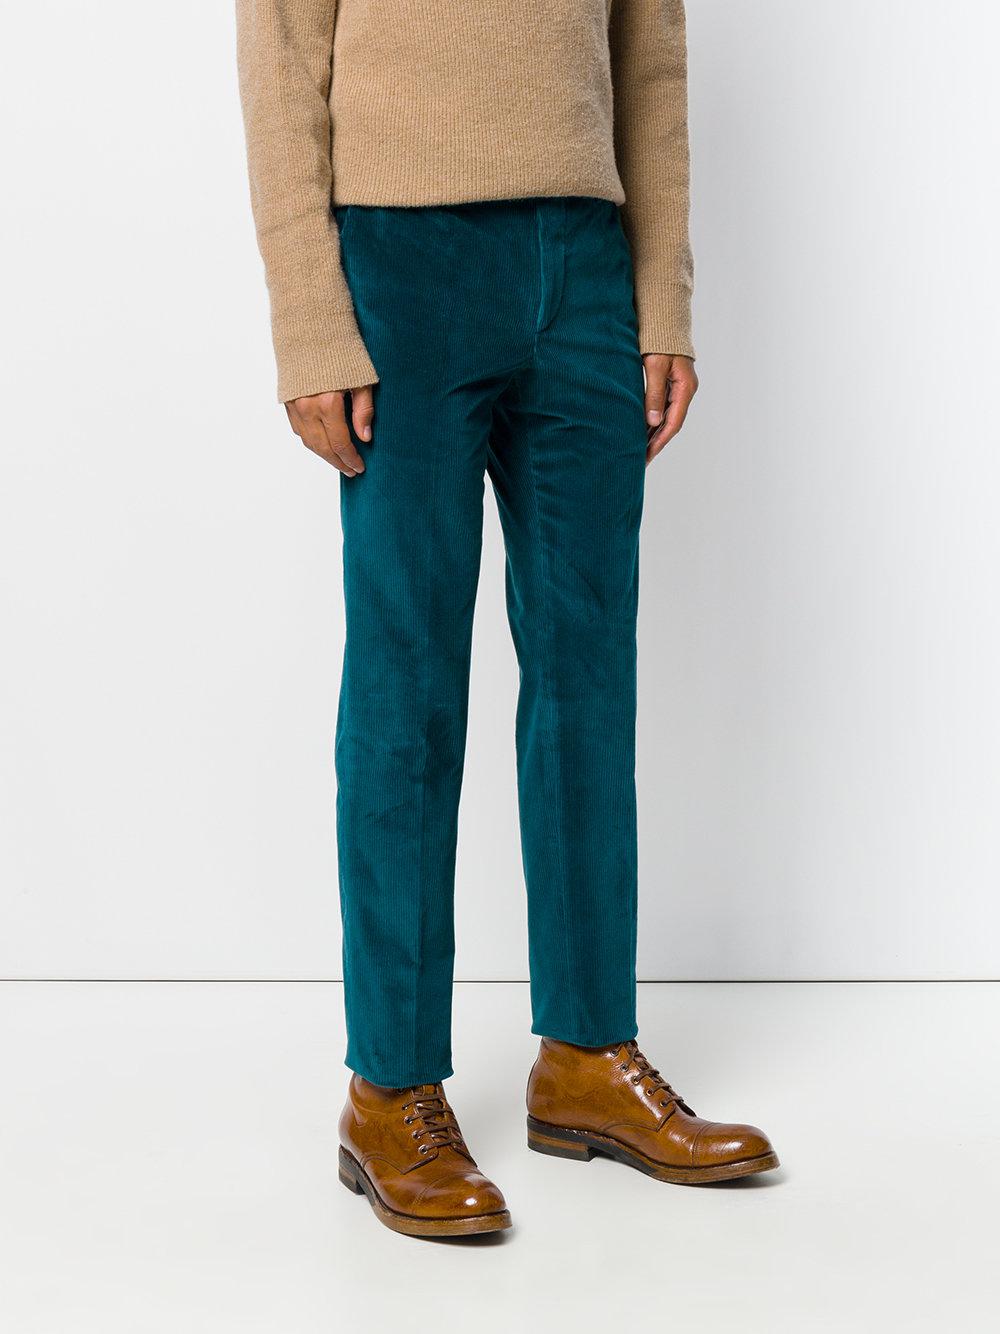 Lyst - Pt01 Slim Fit Trousers in Blue for Men